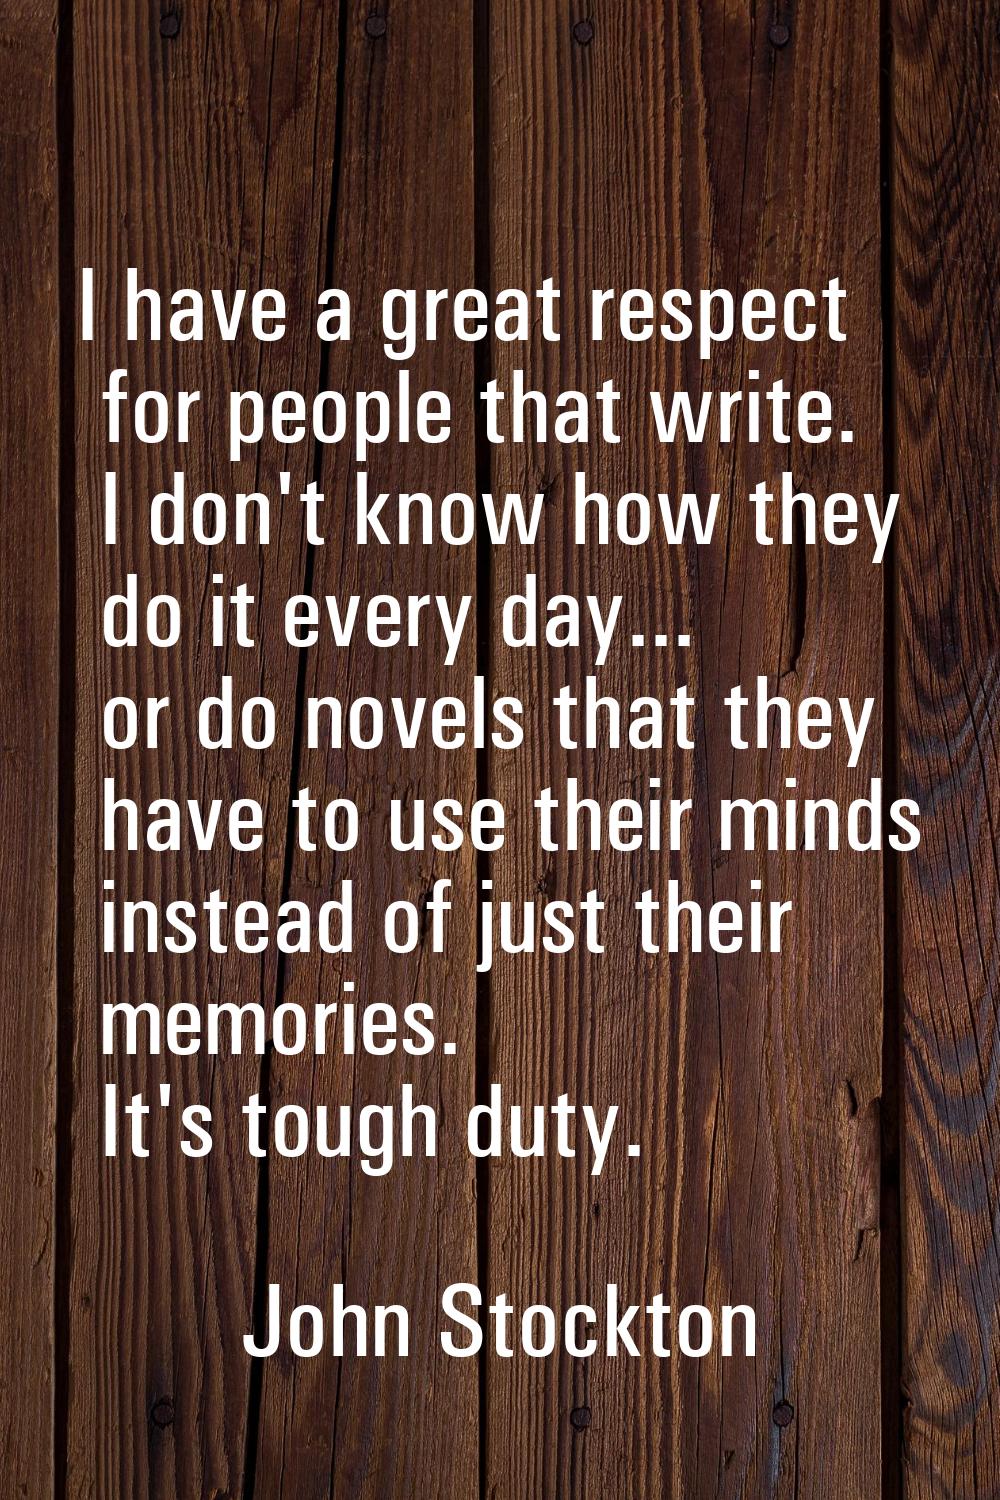 I have a great respect for people that write. I don't know how they do it every day... or do novels